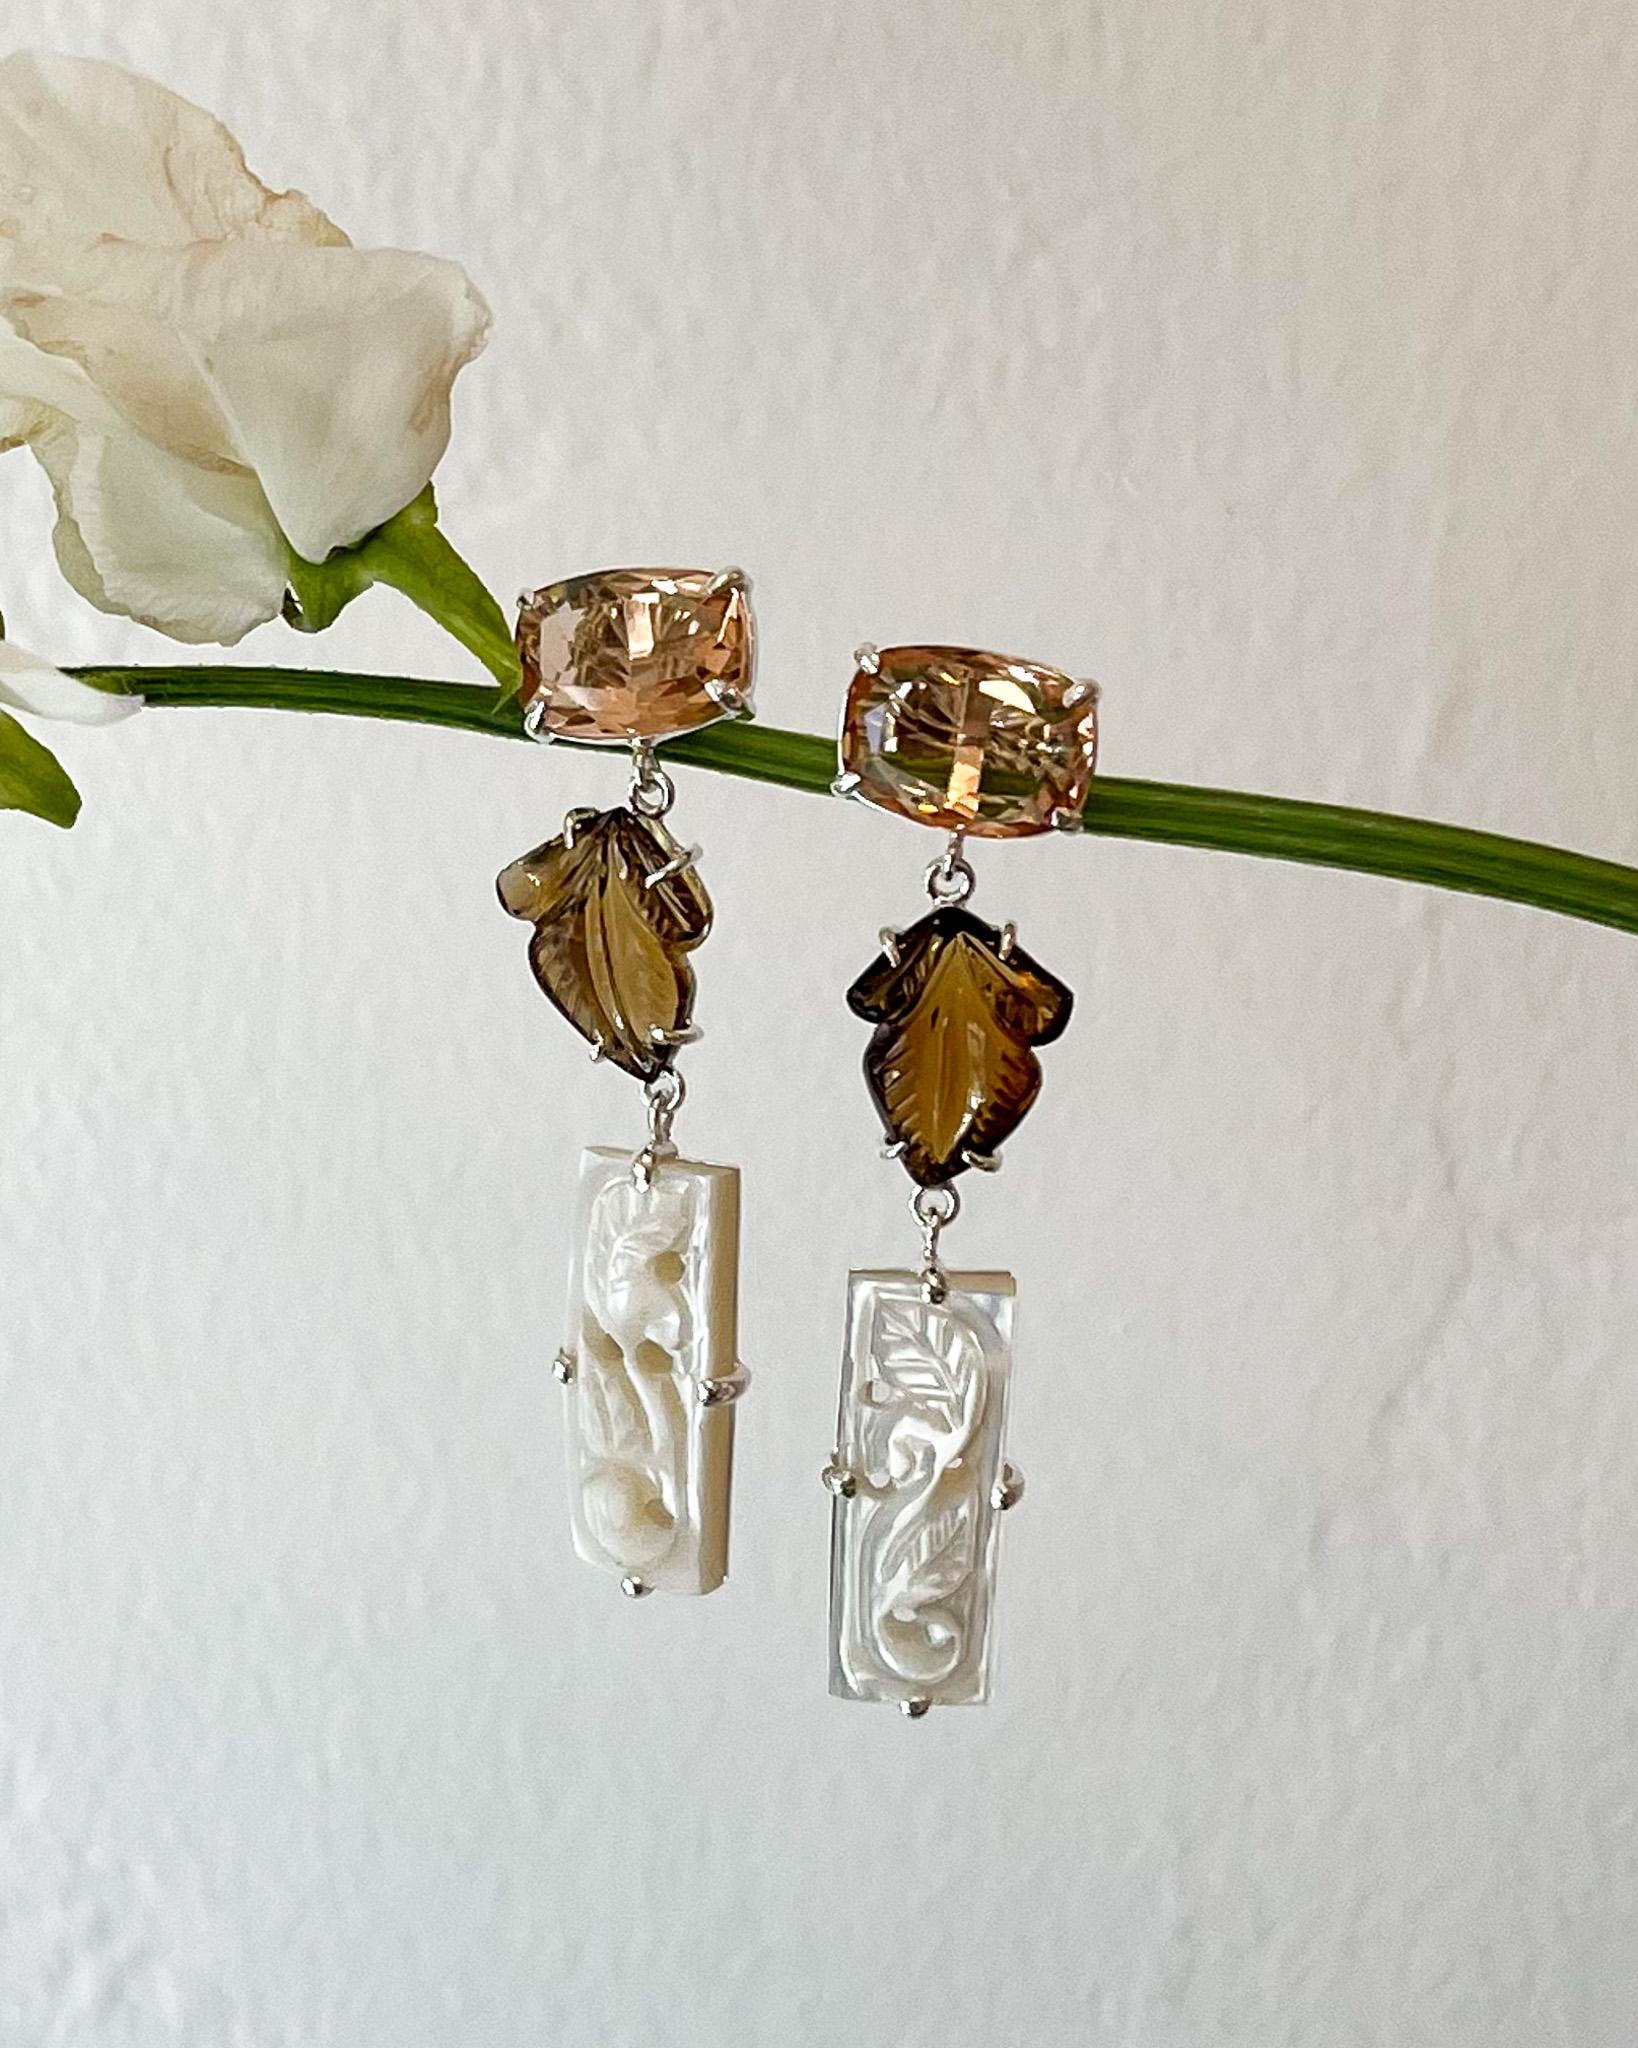 Intention: Easy breezy 

Design: Against the backdrop contemporary life, there's something calming about this design. Cushion cut morganite quartz pairs with hand-cut cognac quartz and a narrow strip of hand-cut mother of pearl. A leaf motif is